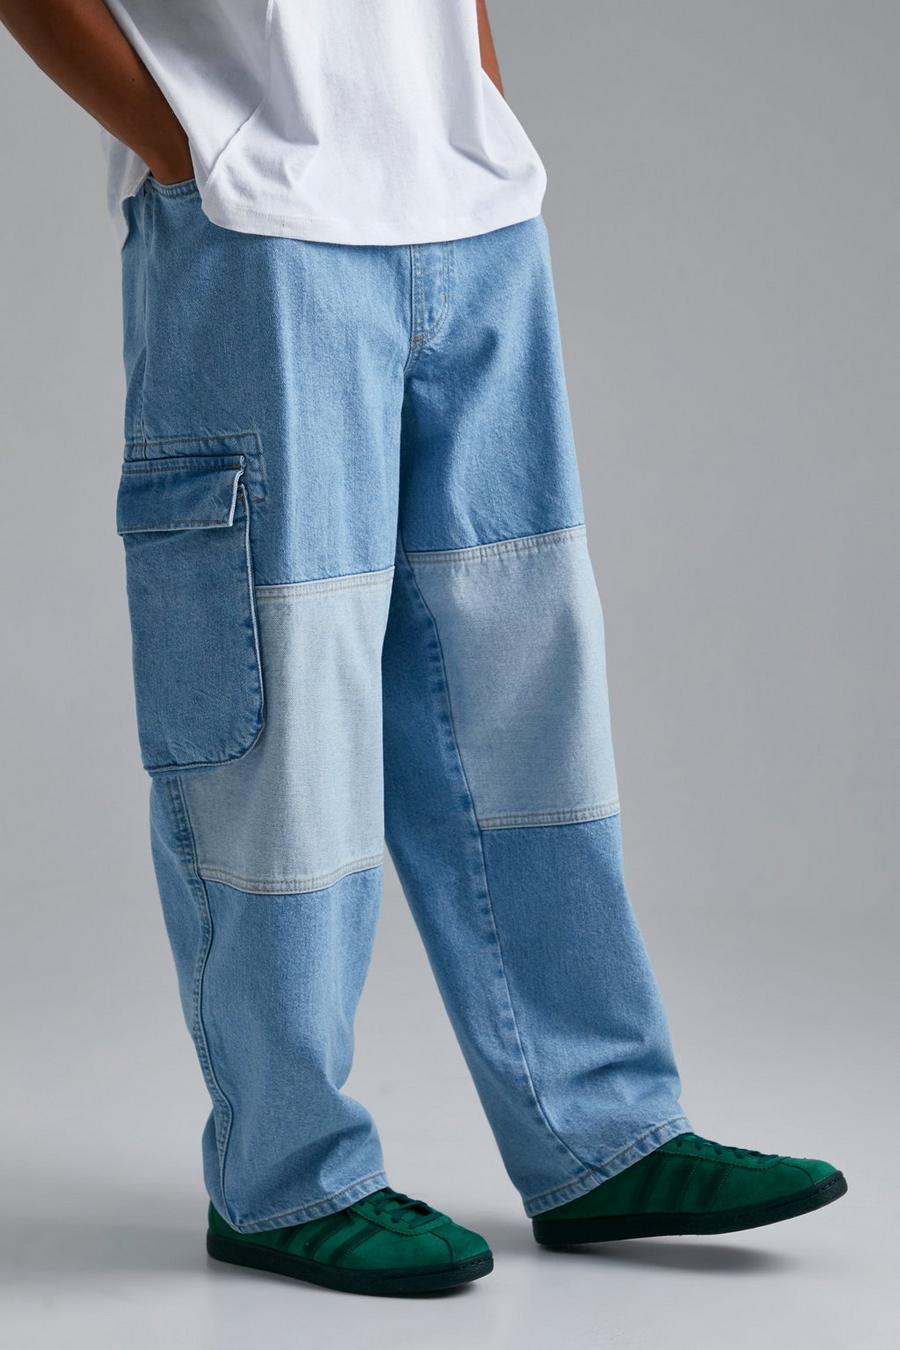 repeat Journey spring Baggy Fit Skate Cargo Jeans With Buckle Waist | boohoo